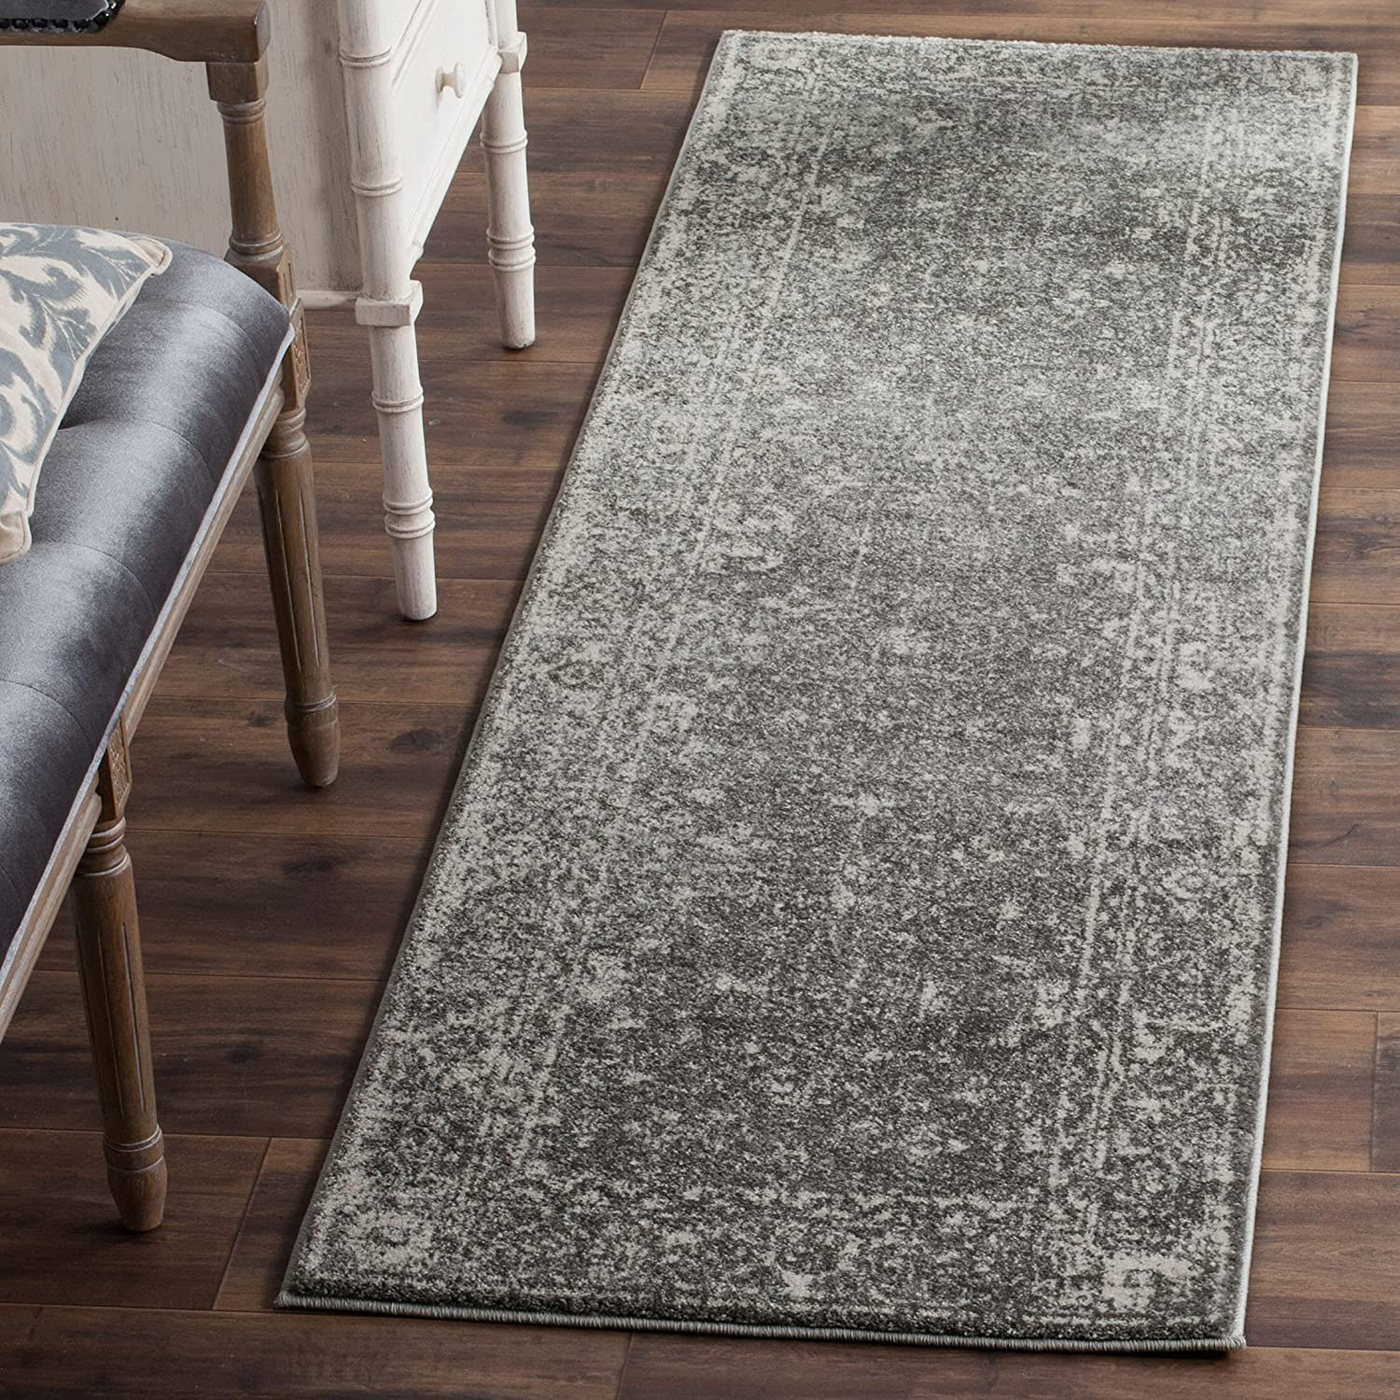 Safavieh Evoke Collection EVK270S Shabby Chic Distressed Non-Shedding Stain Resistant Living Room Bedroom Runner, 2'2" x 9' , Grey / Ivory